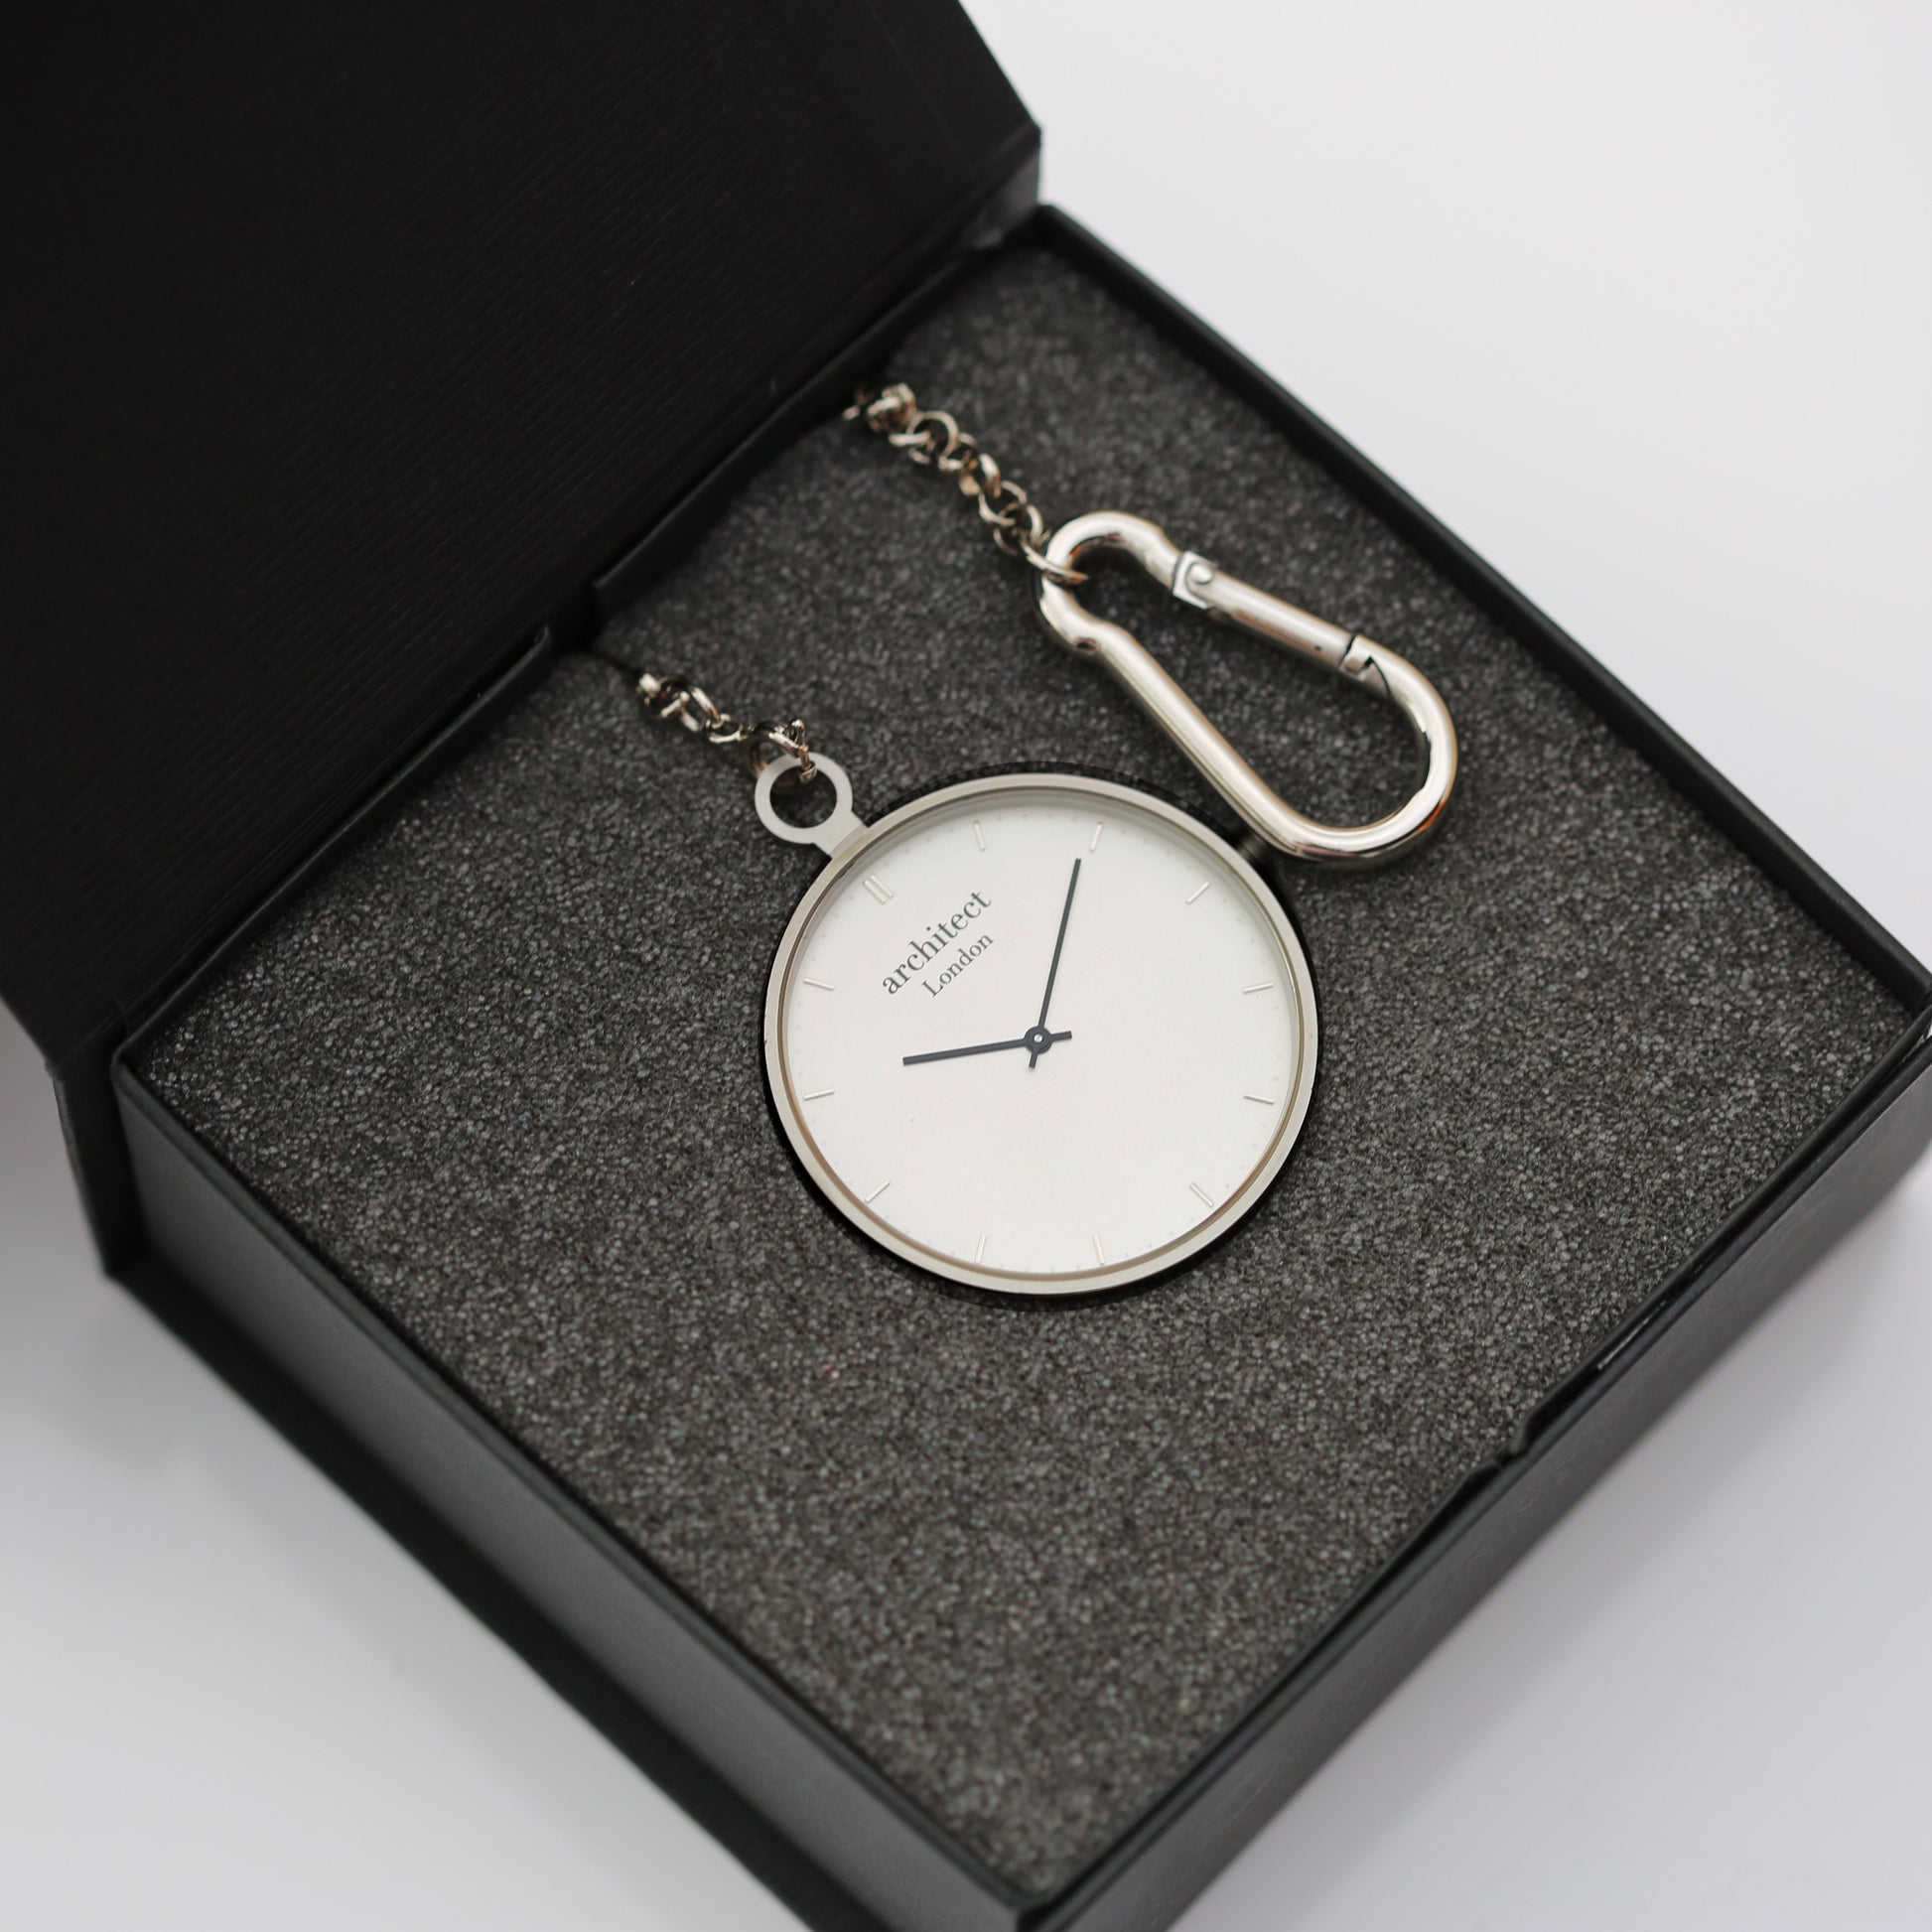 Personalized Pocket Watches - Modern Pocket Watch Silver - Handwriting Engraving 